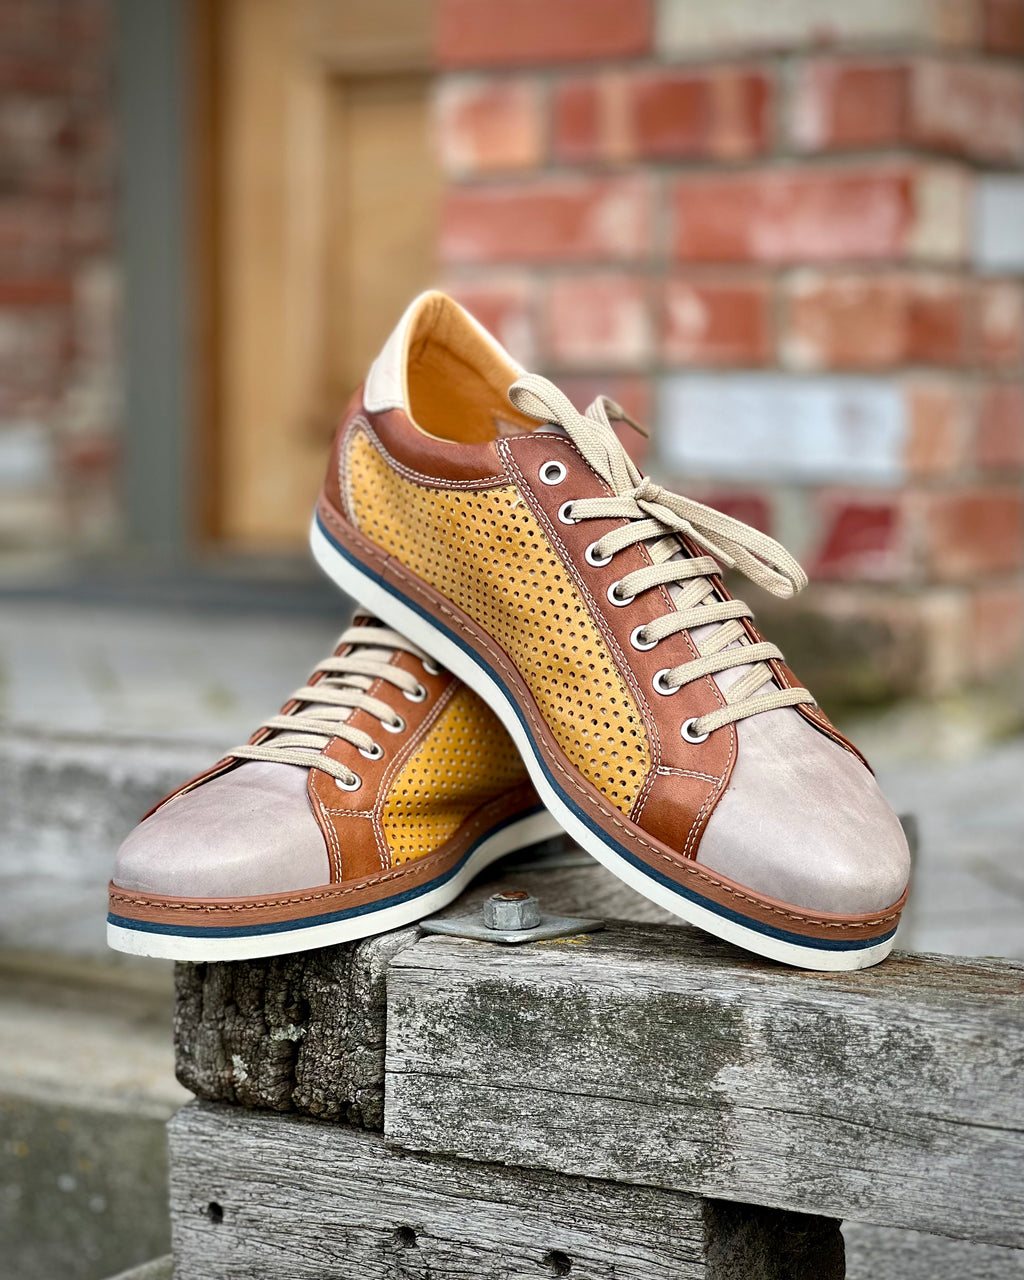 Sports-style casual leather shoes by Italiano